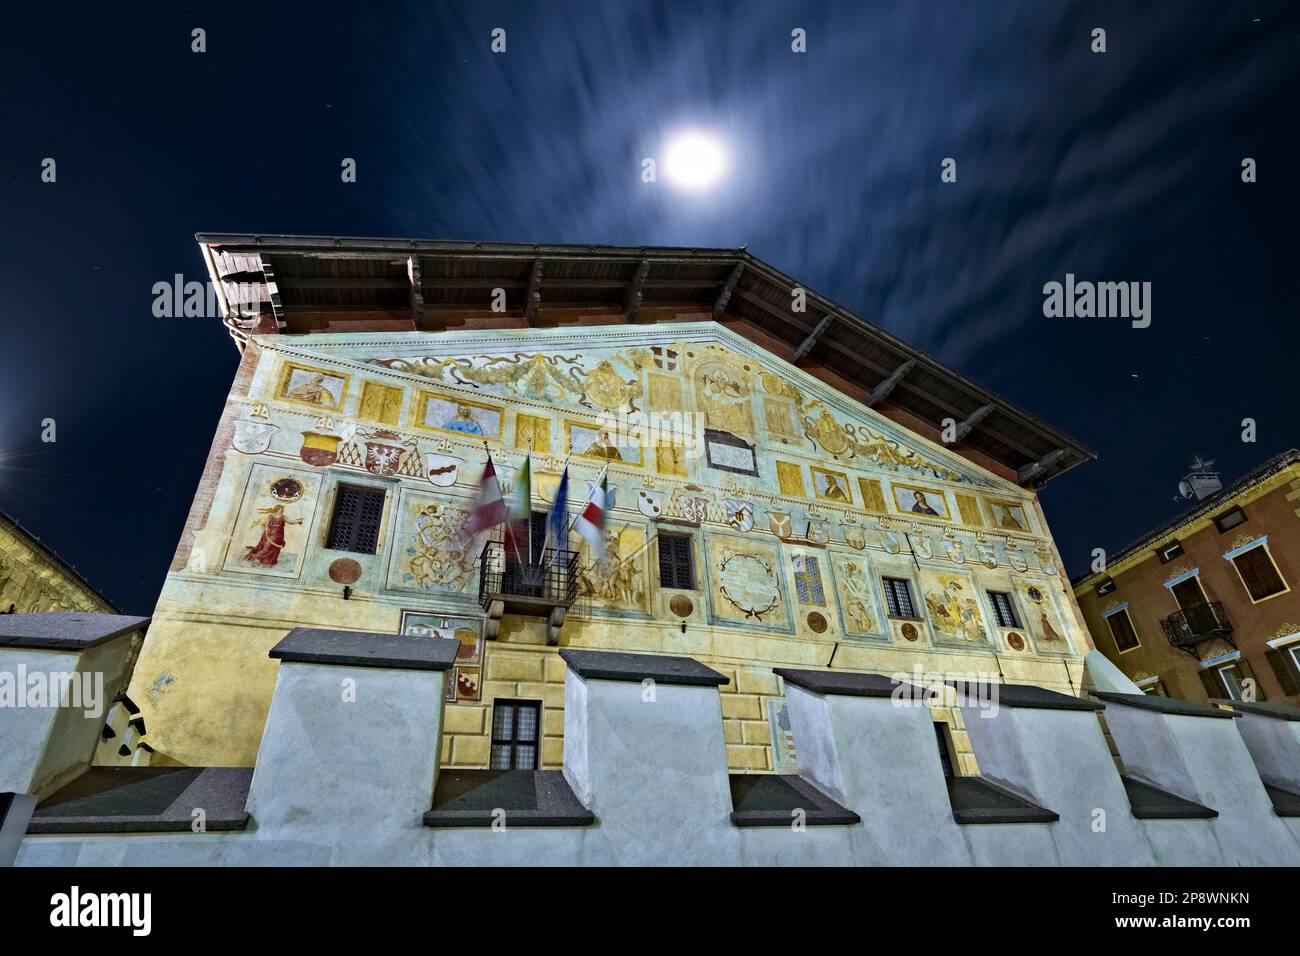 The frescoed facade of the palace of the Magnificent Community of Fiemme di Cavalese. Fiemme Valley, Trentino, Italy. Stock Photo